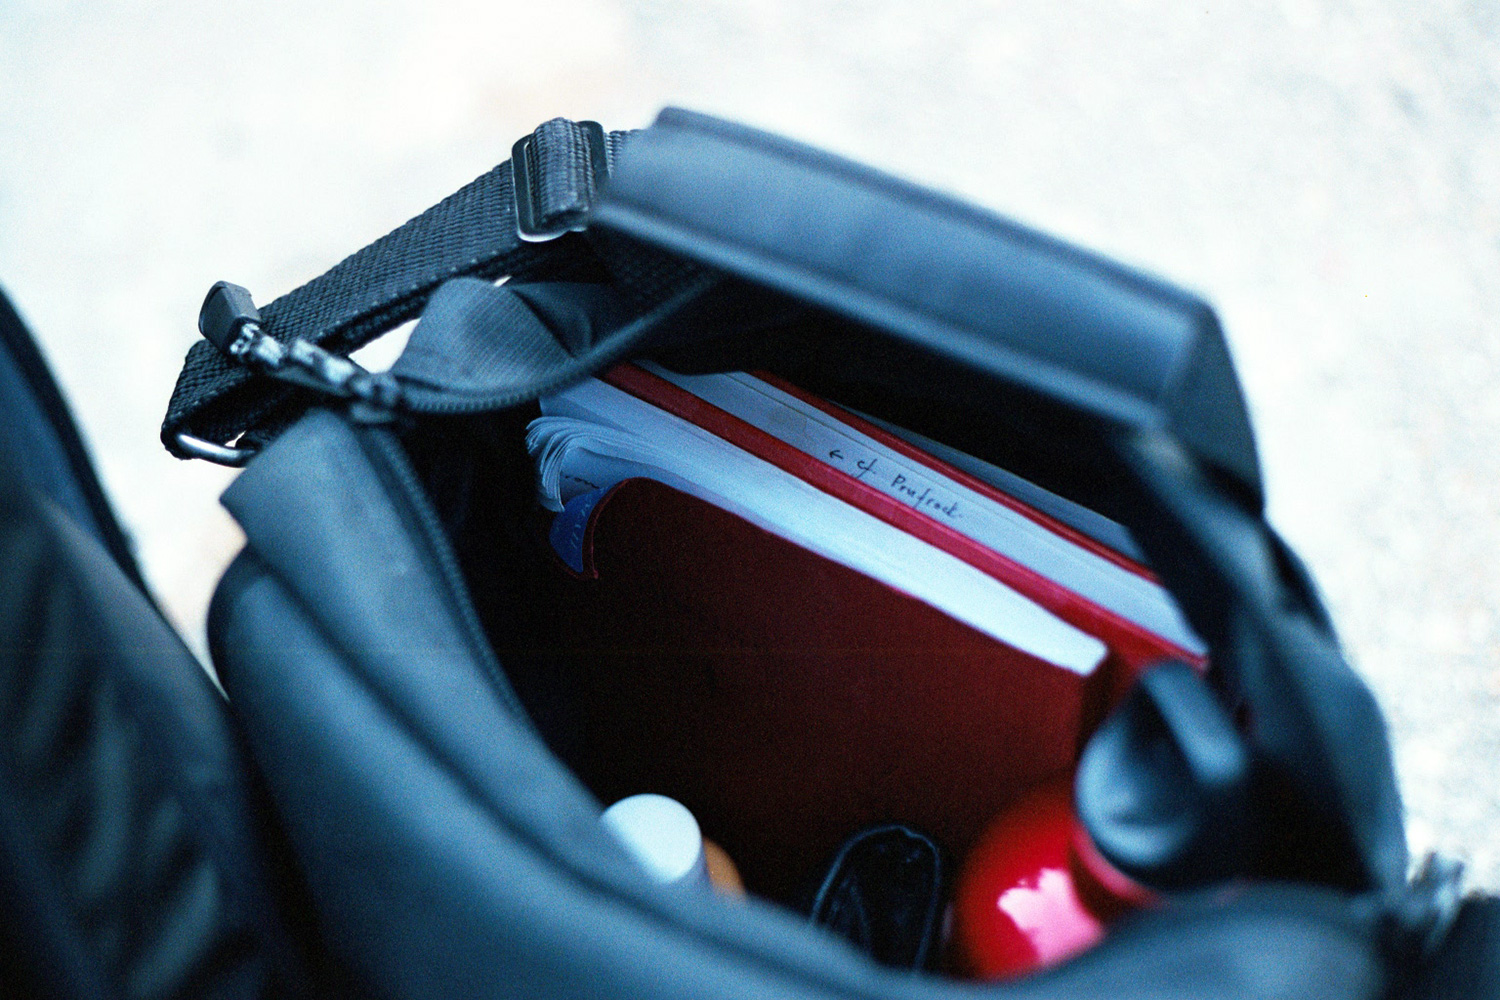 Bag with notebooks, water-bottle, and sunscreen.